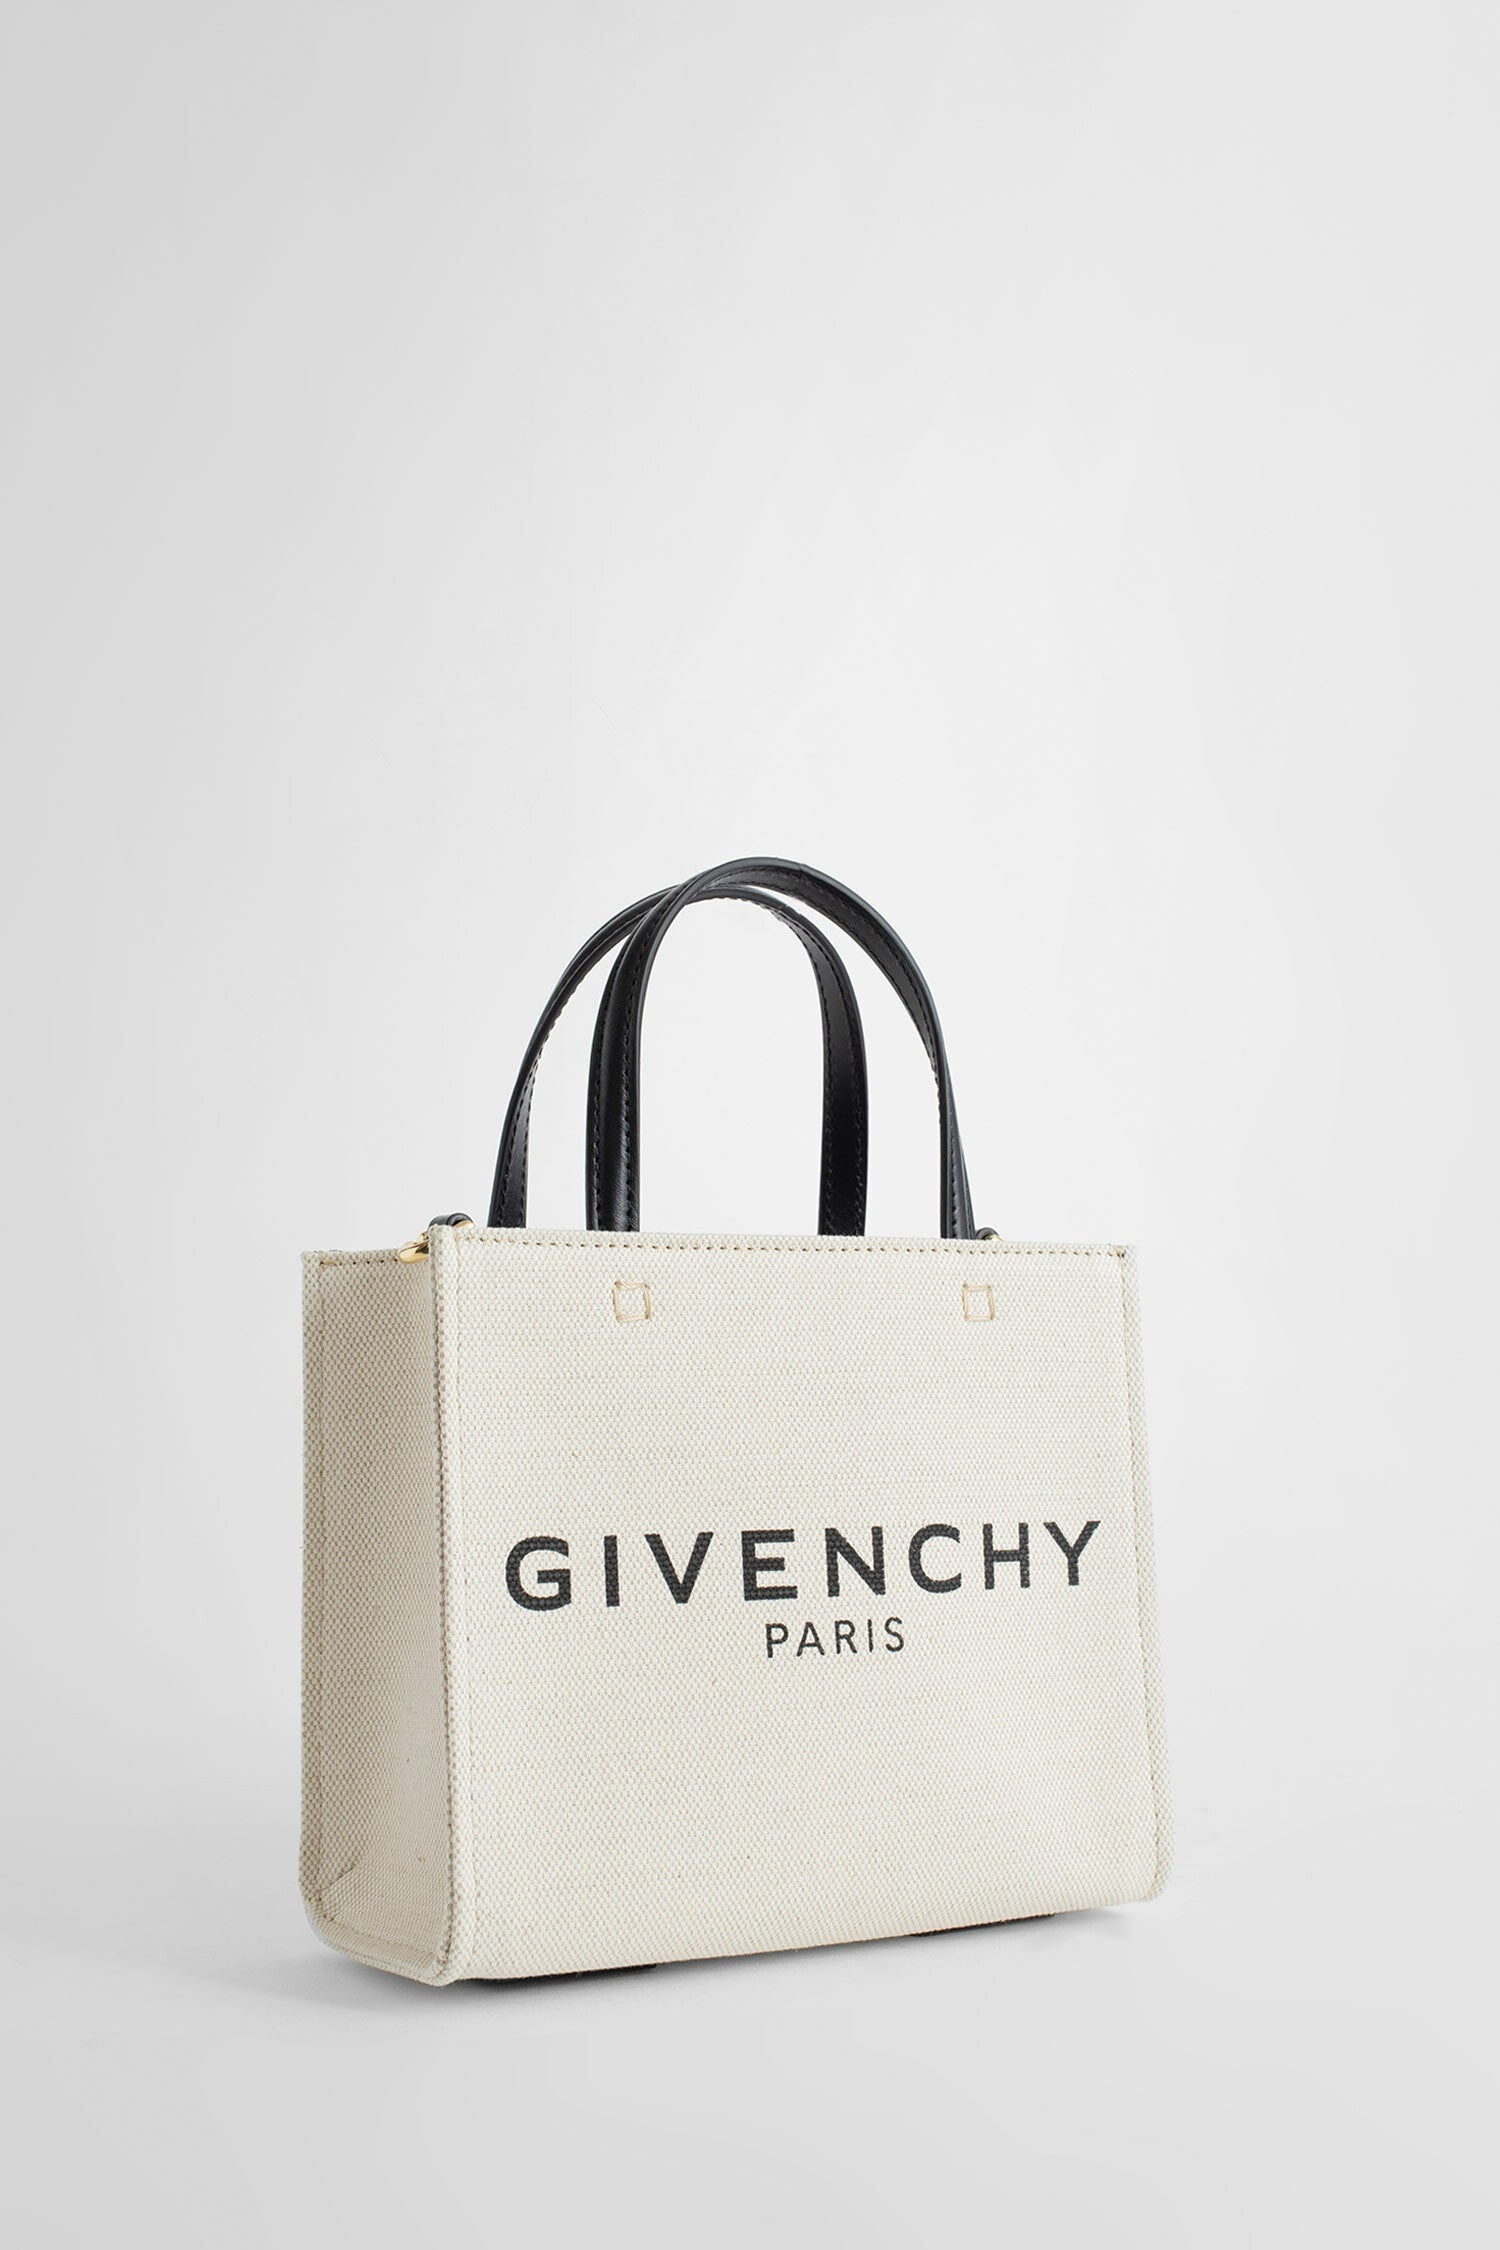 GIVENCHY WOMAN BEIGE TOTE BAGS - 2